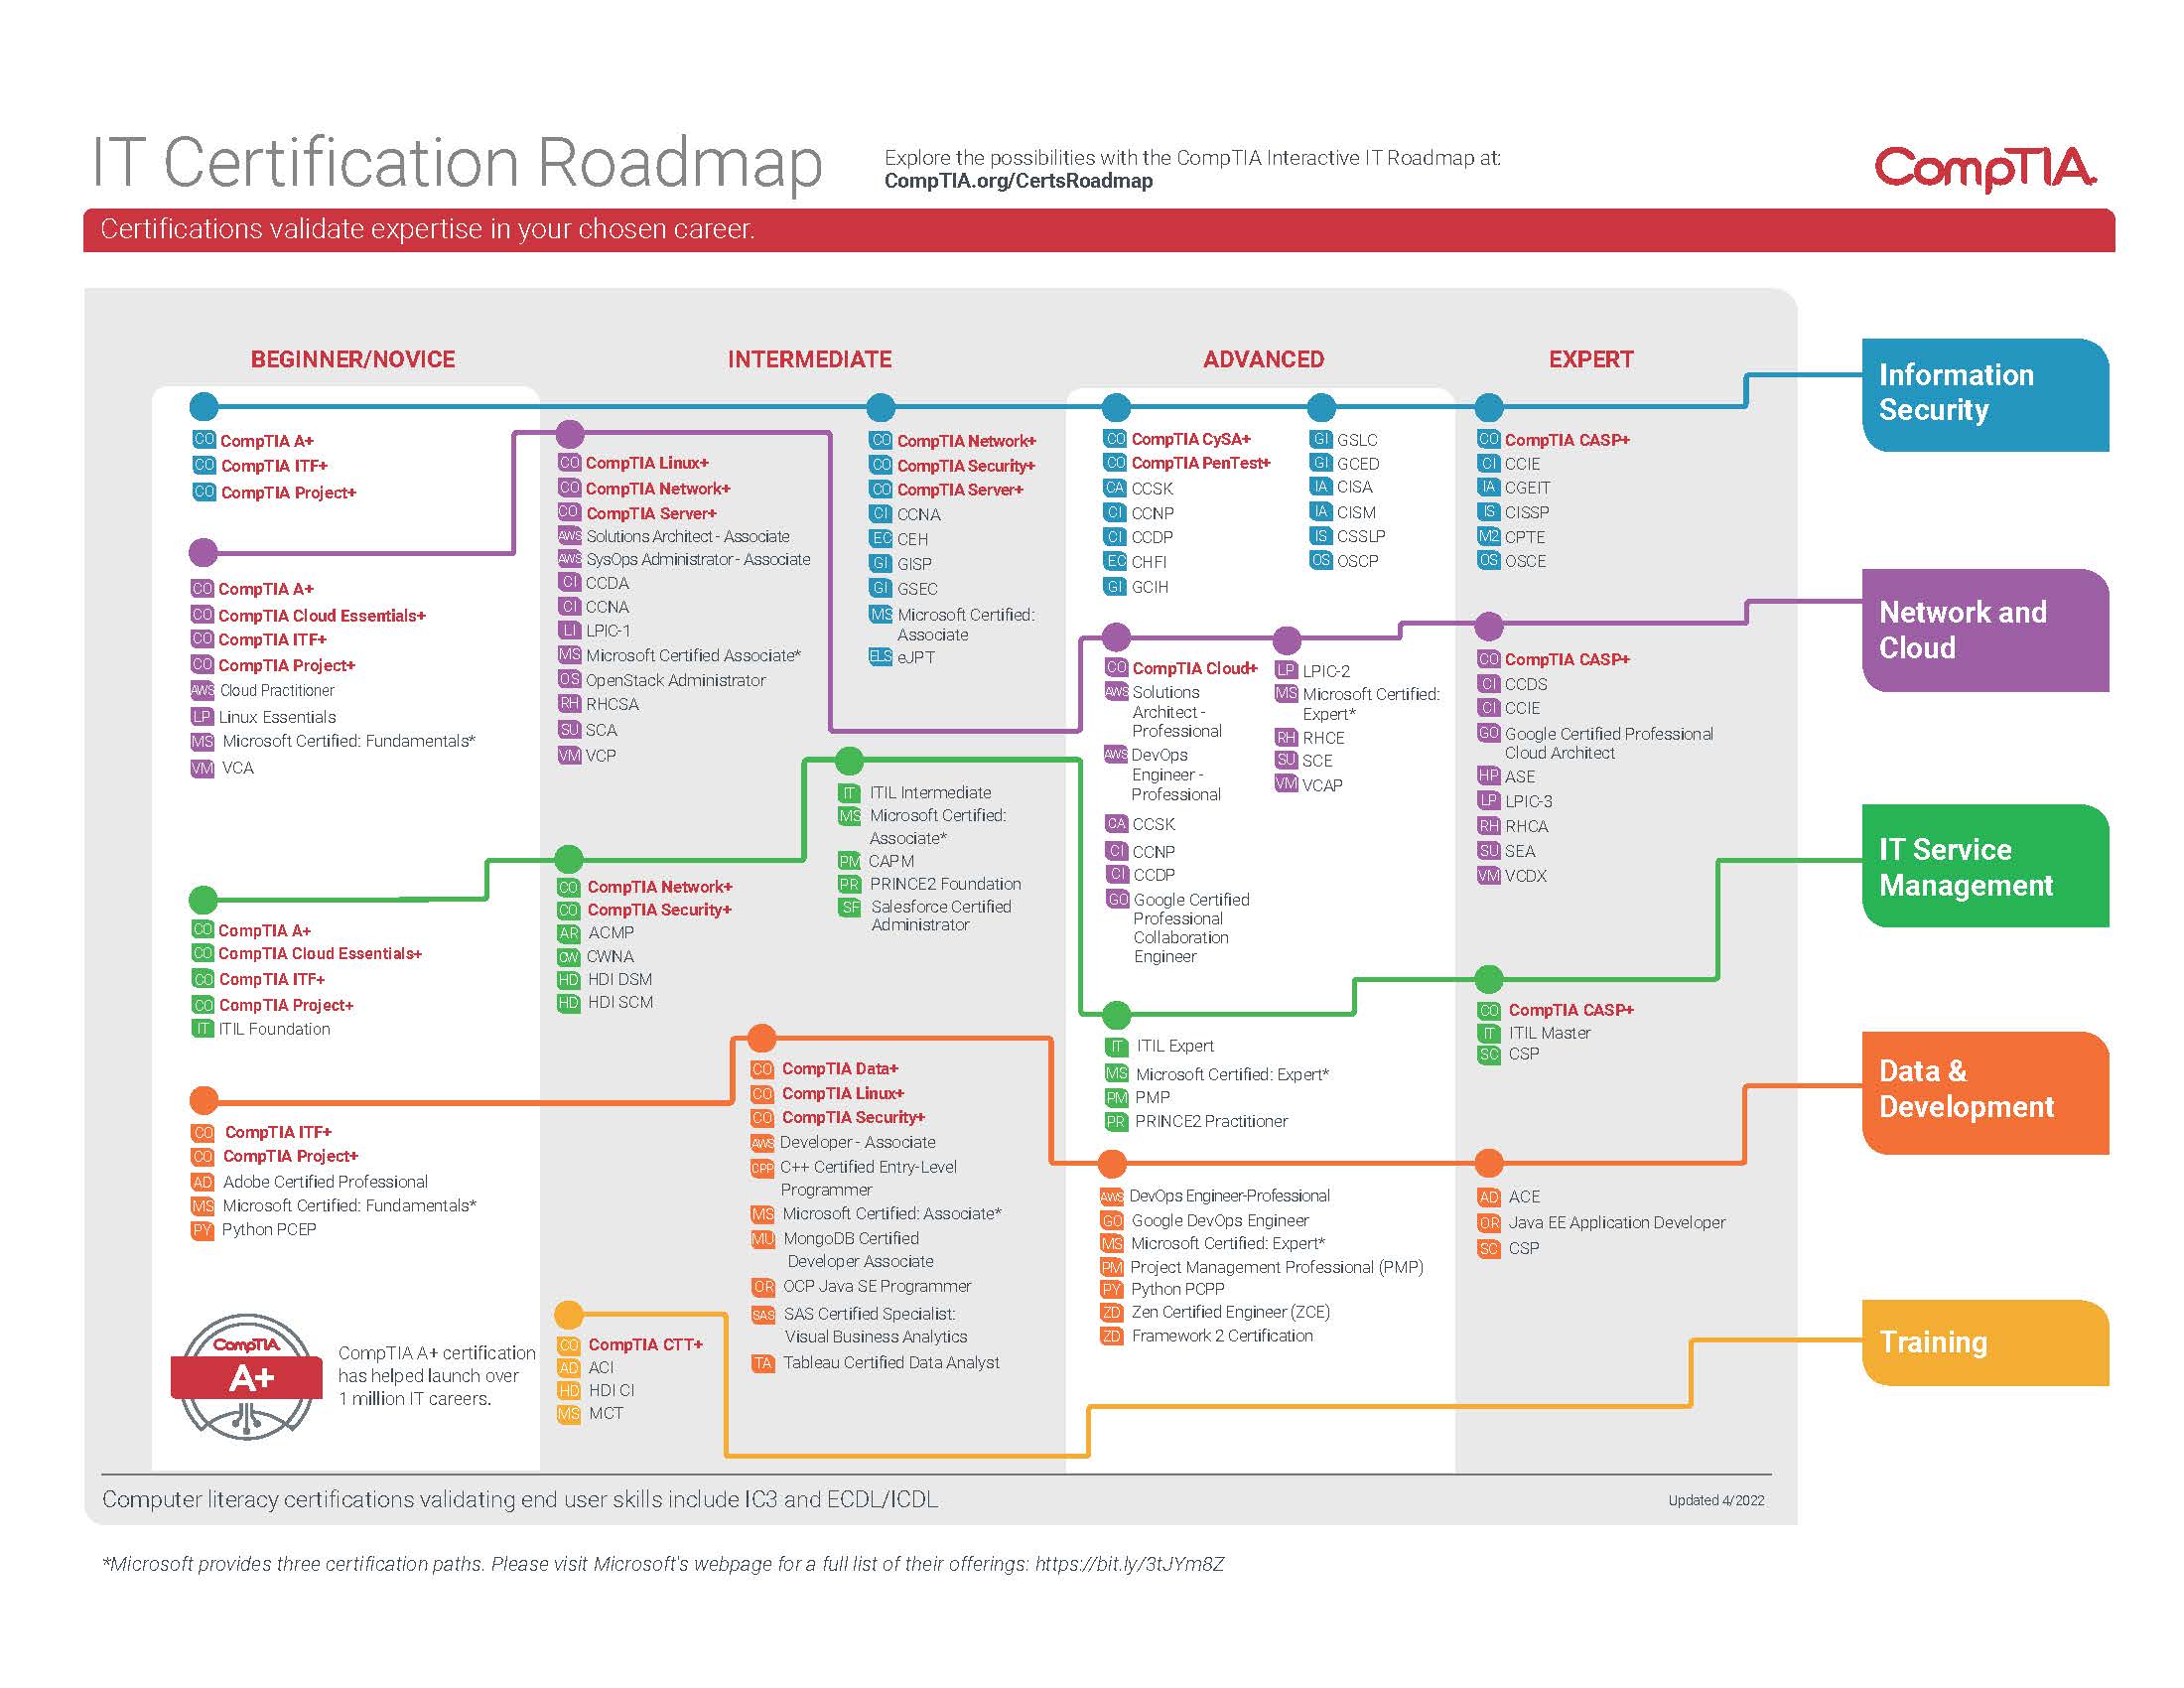 CompTIA certifications courses and exams